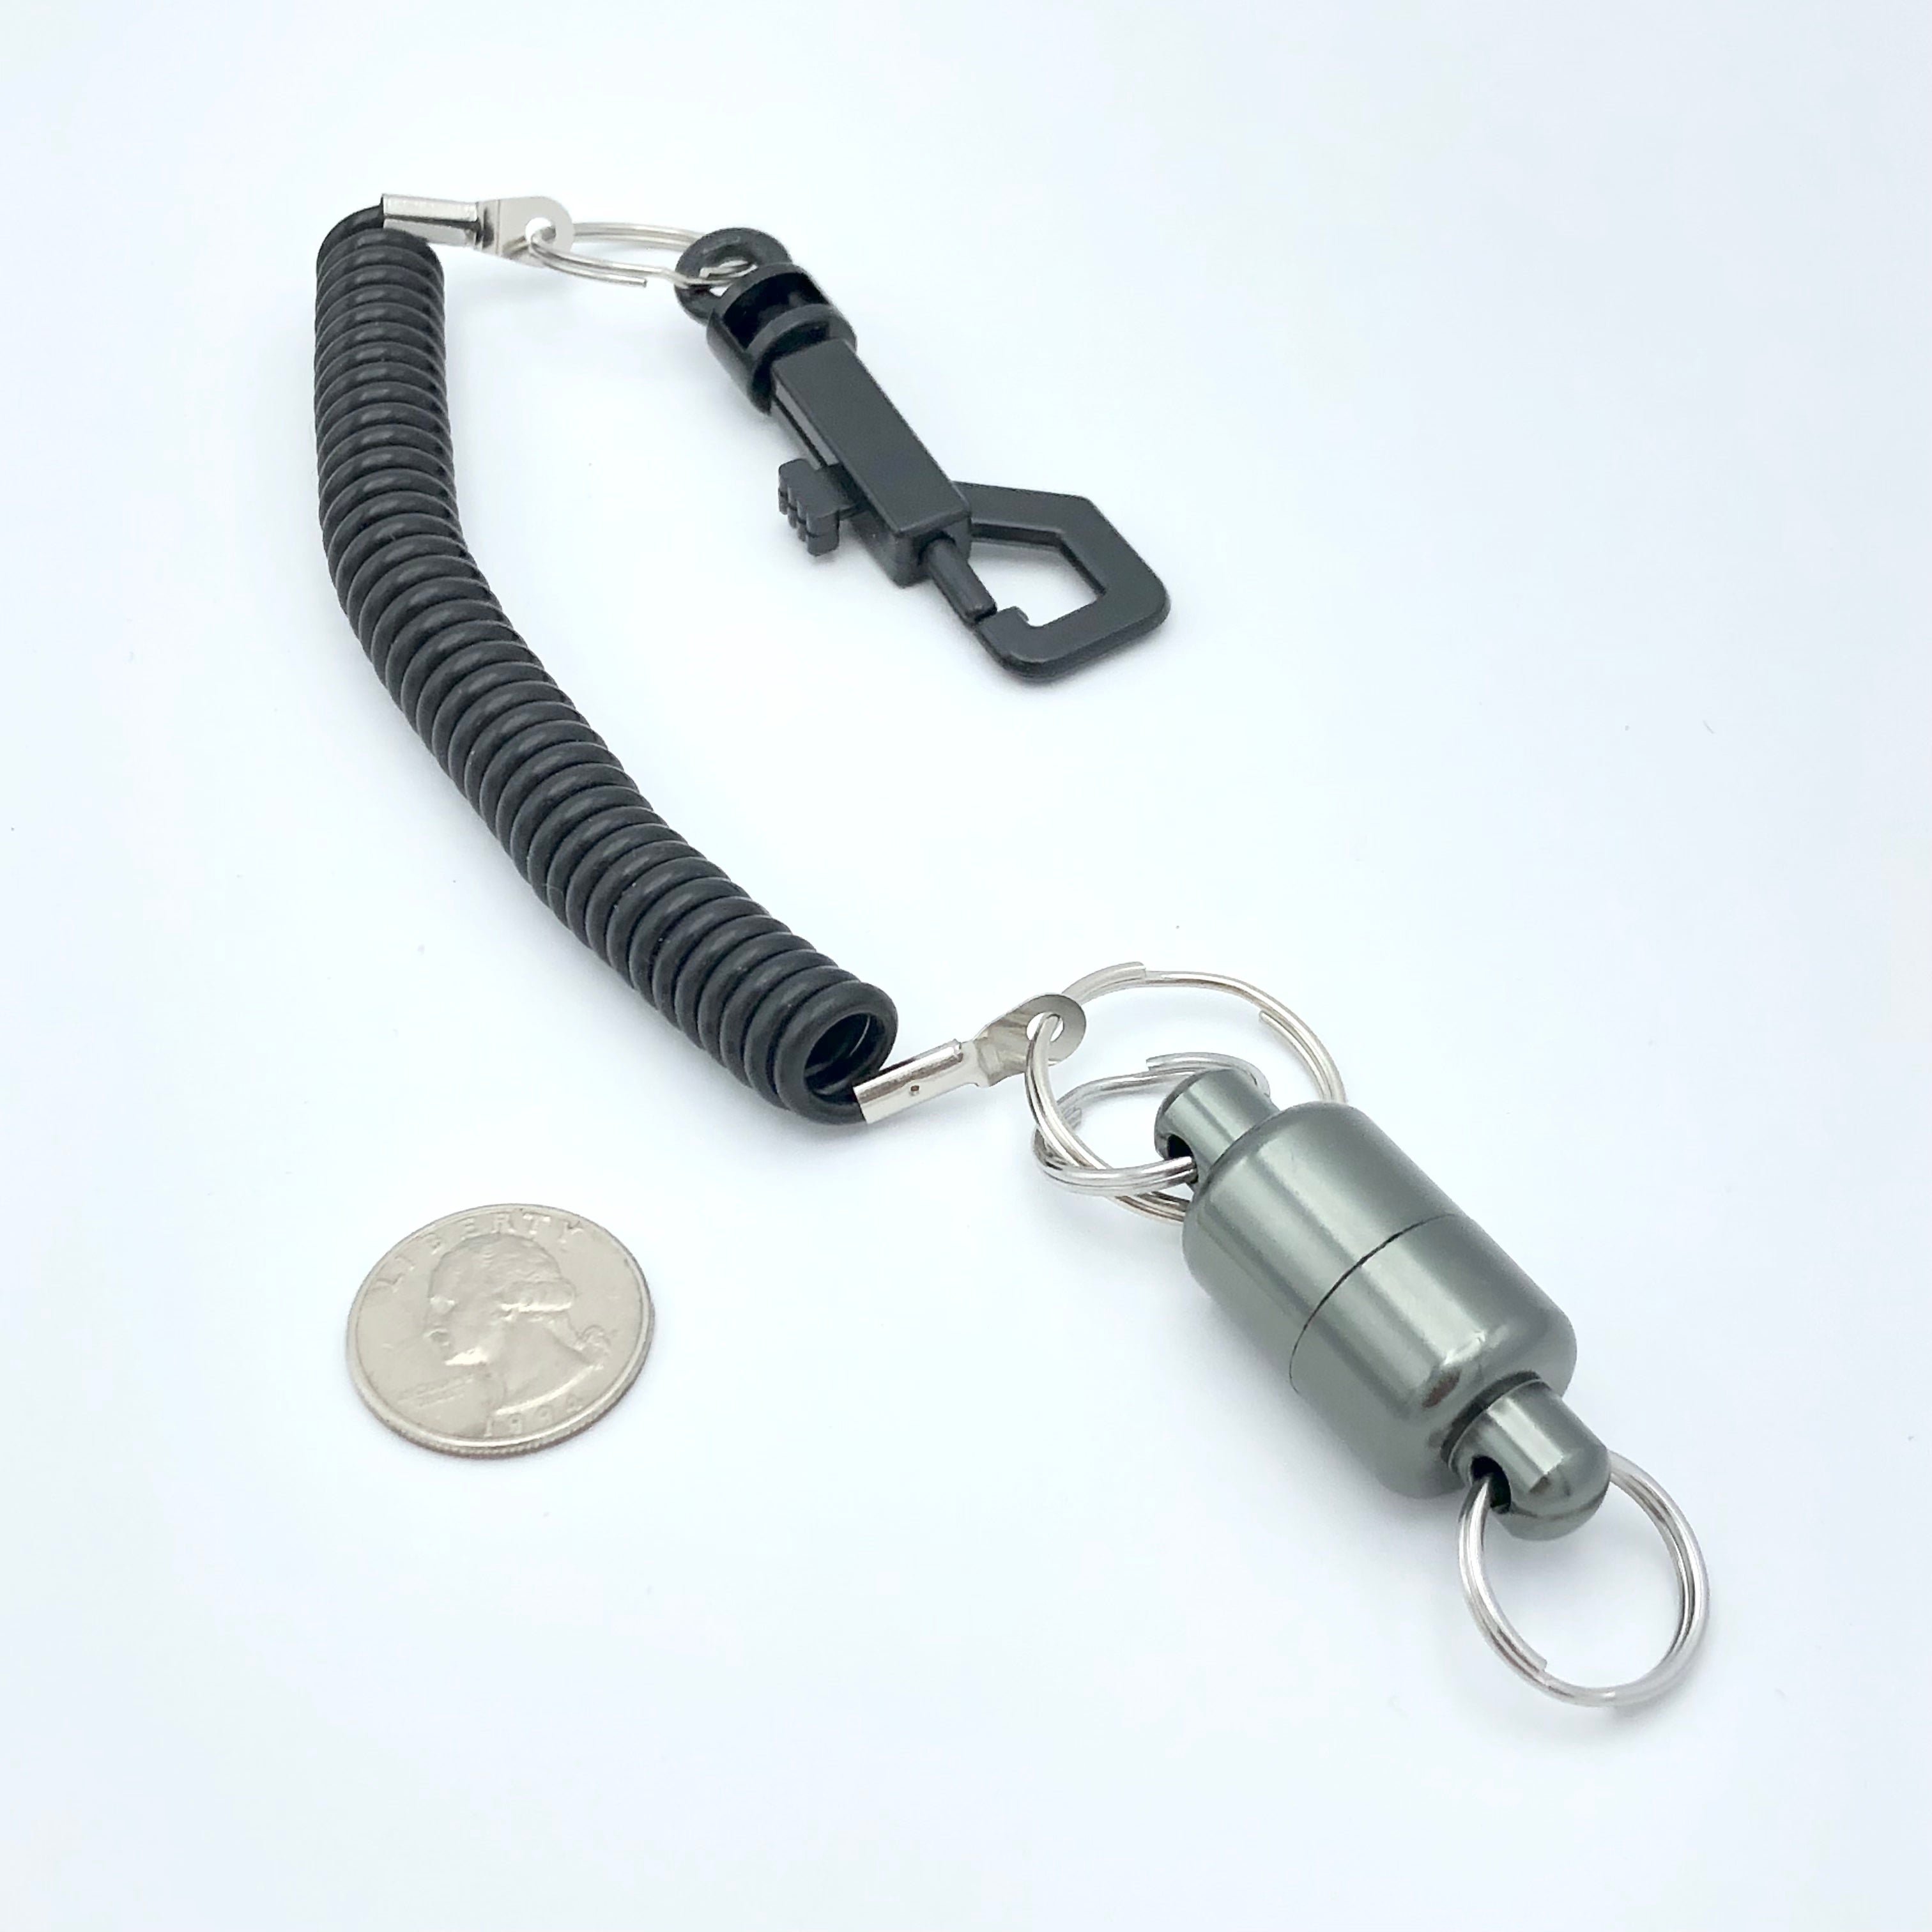 Magnetic gear retainer with lanyard